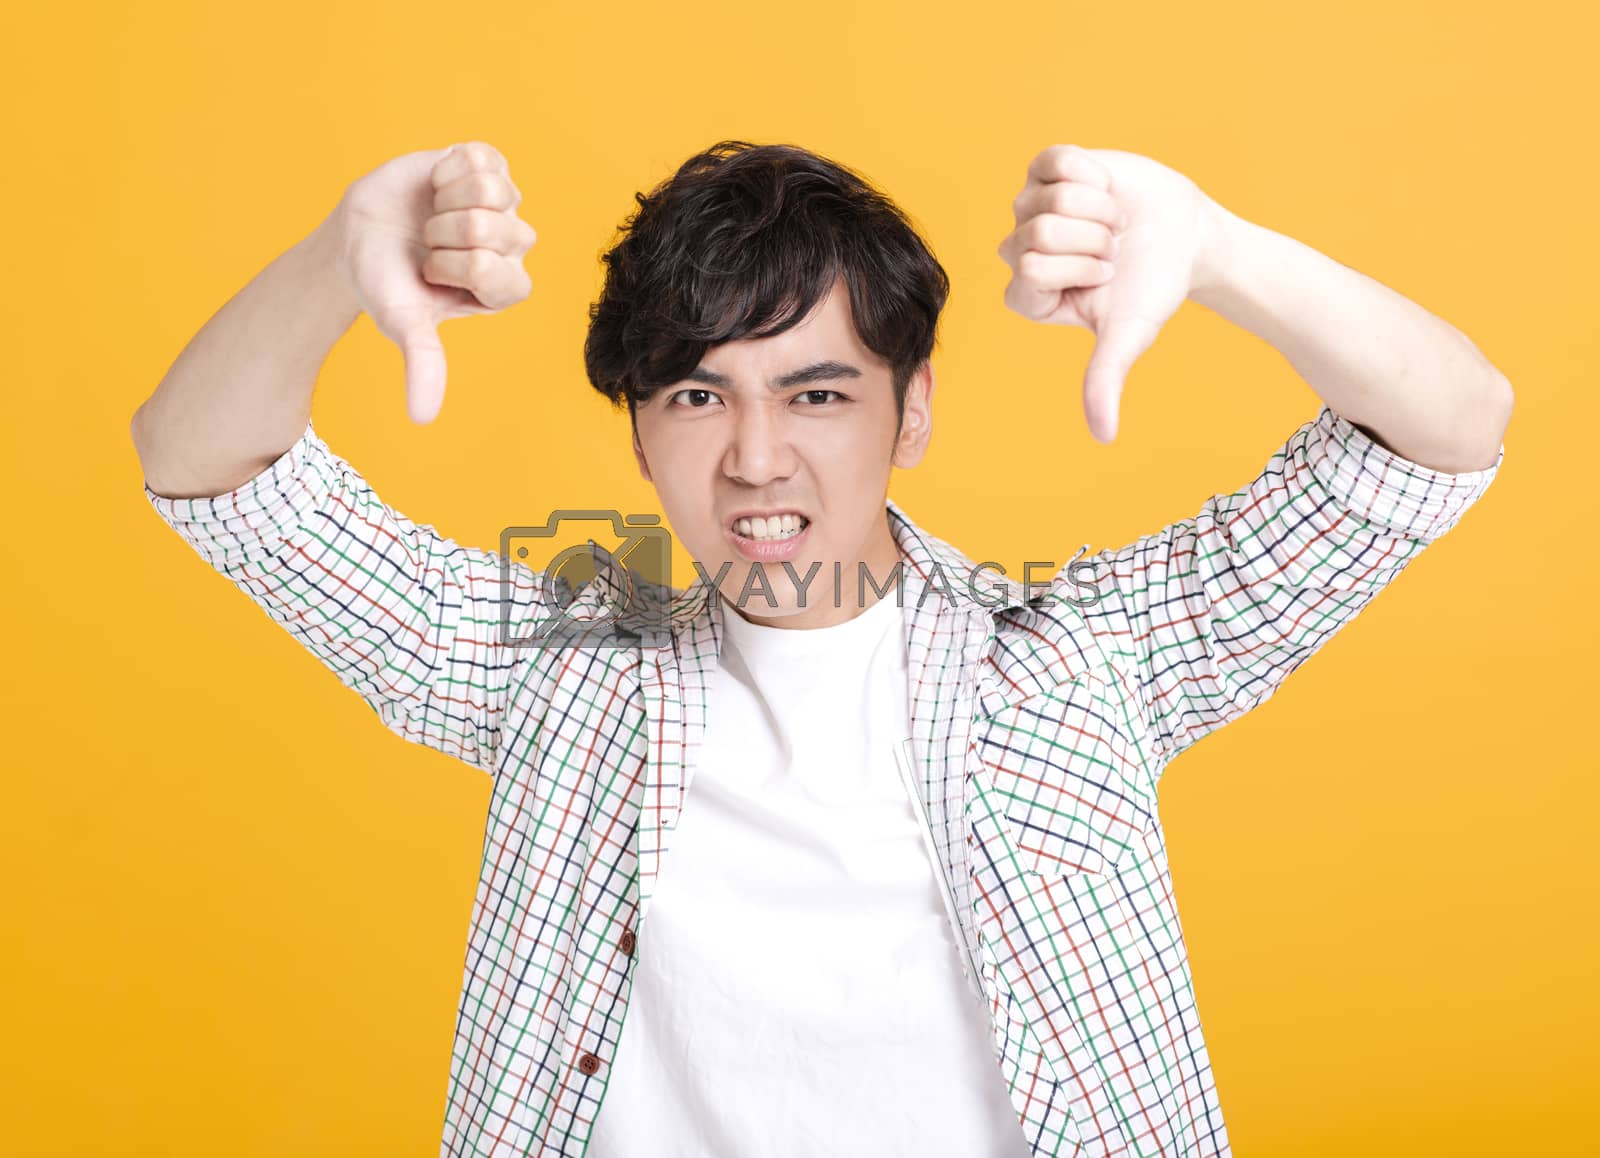 Royalty free image of young man showing thumbs down by tomwang